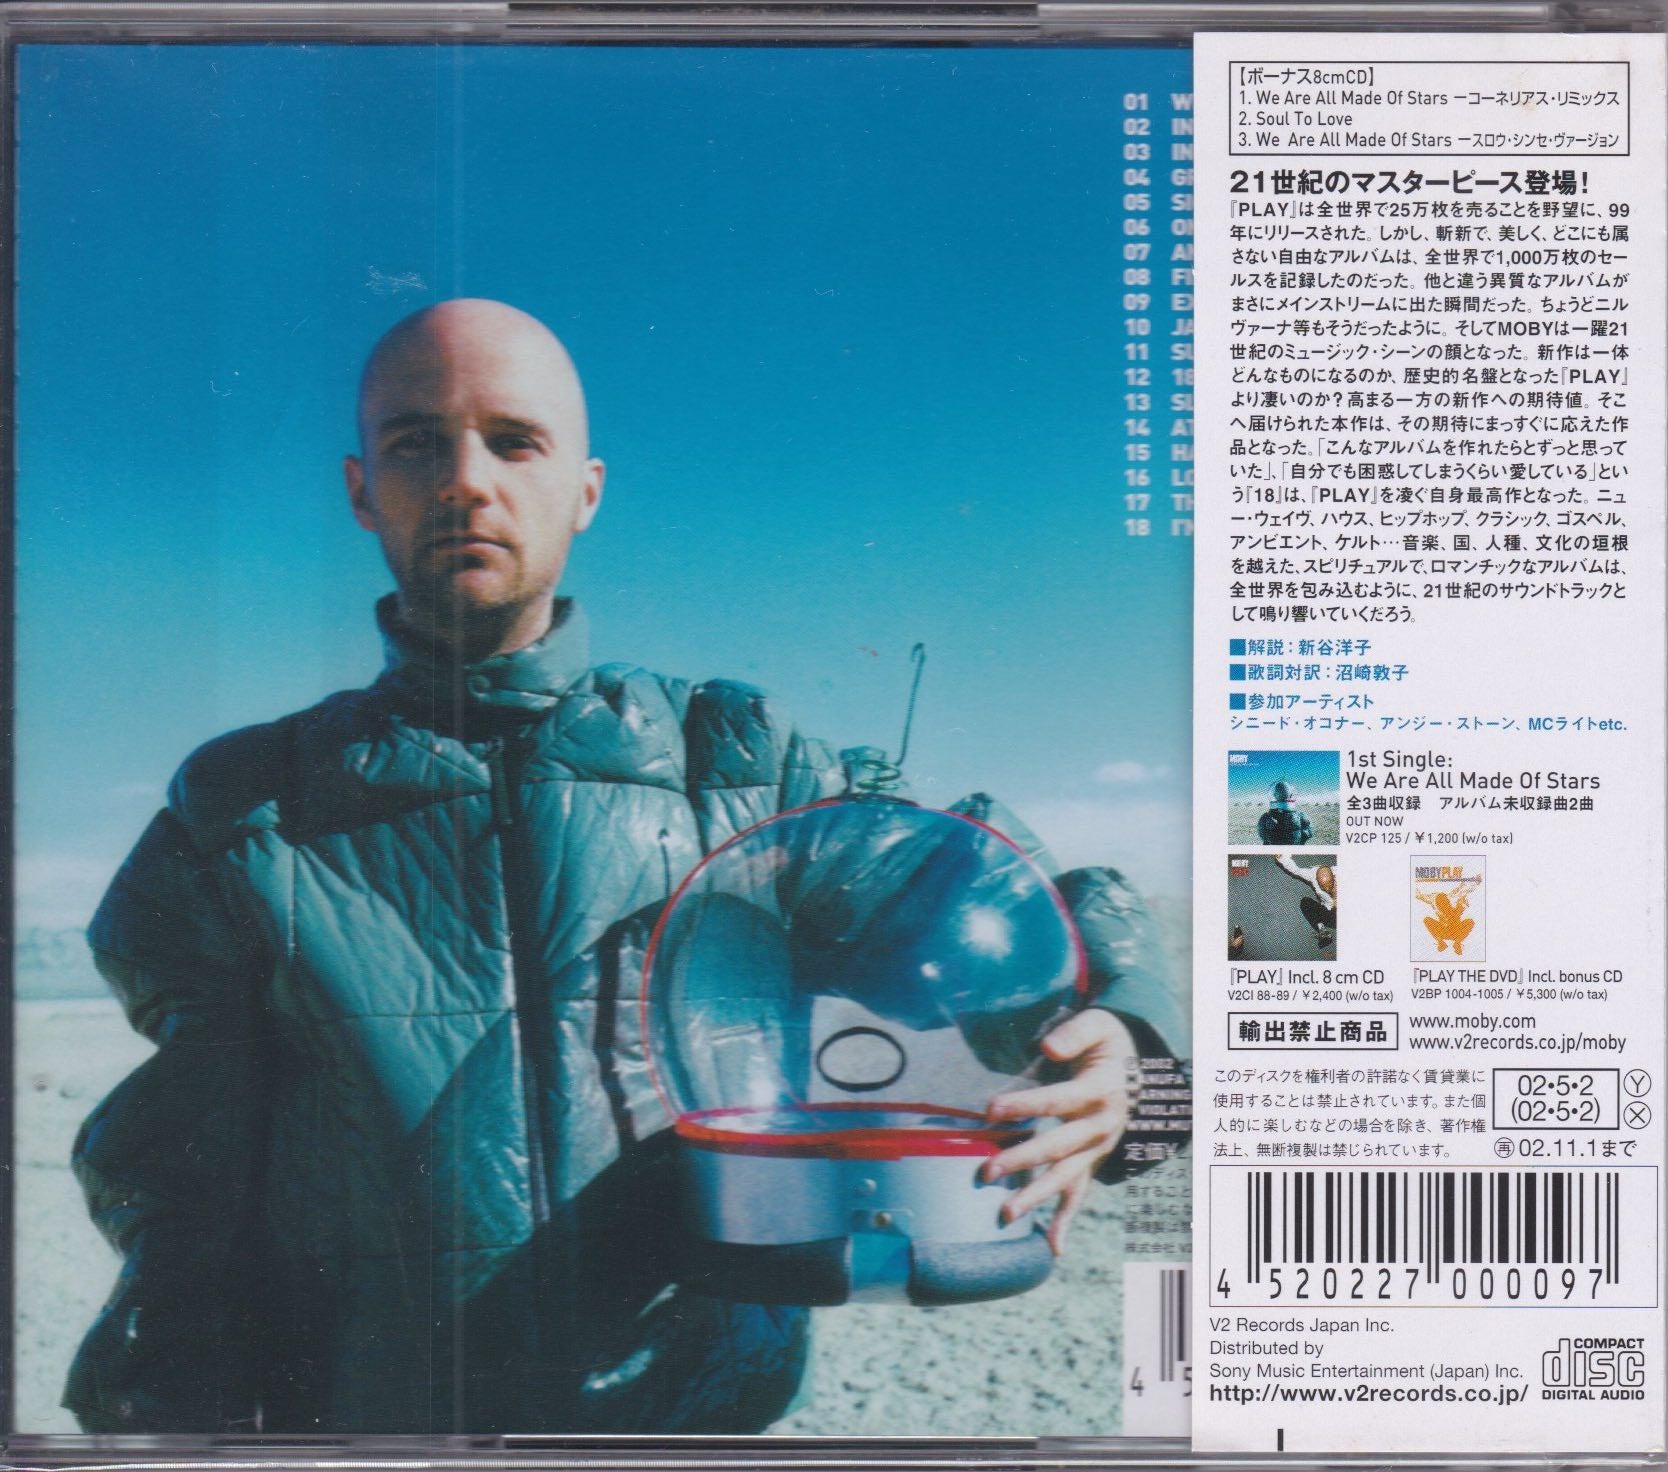 Moby ‎– 18     (Pre-owned)